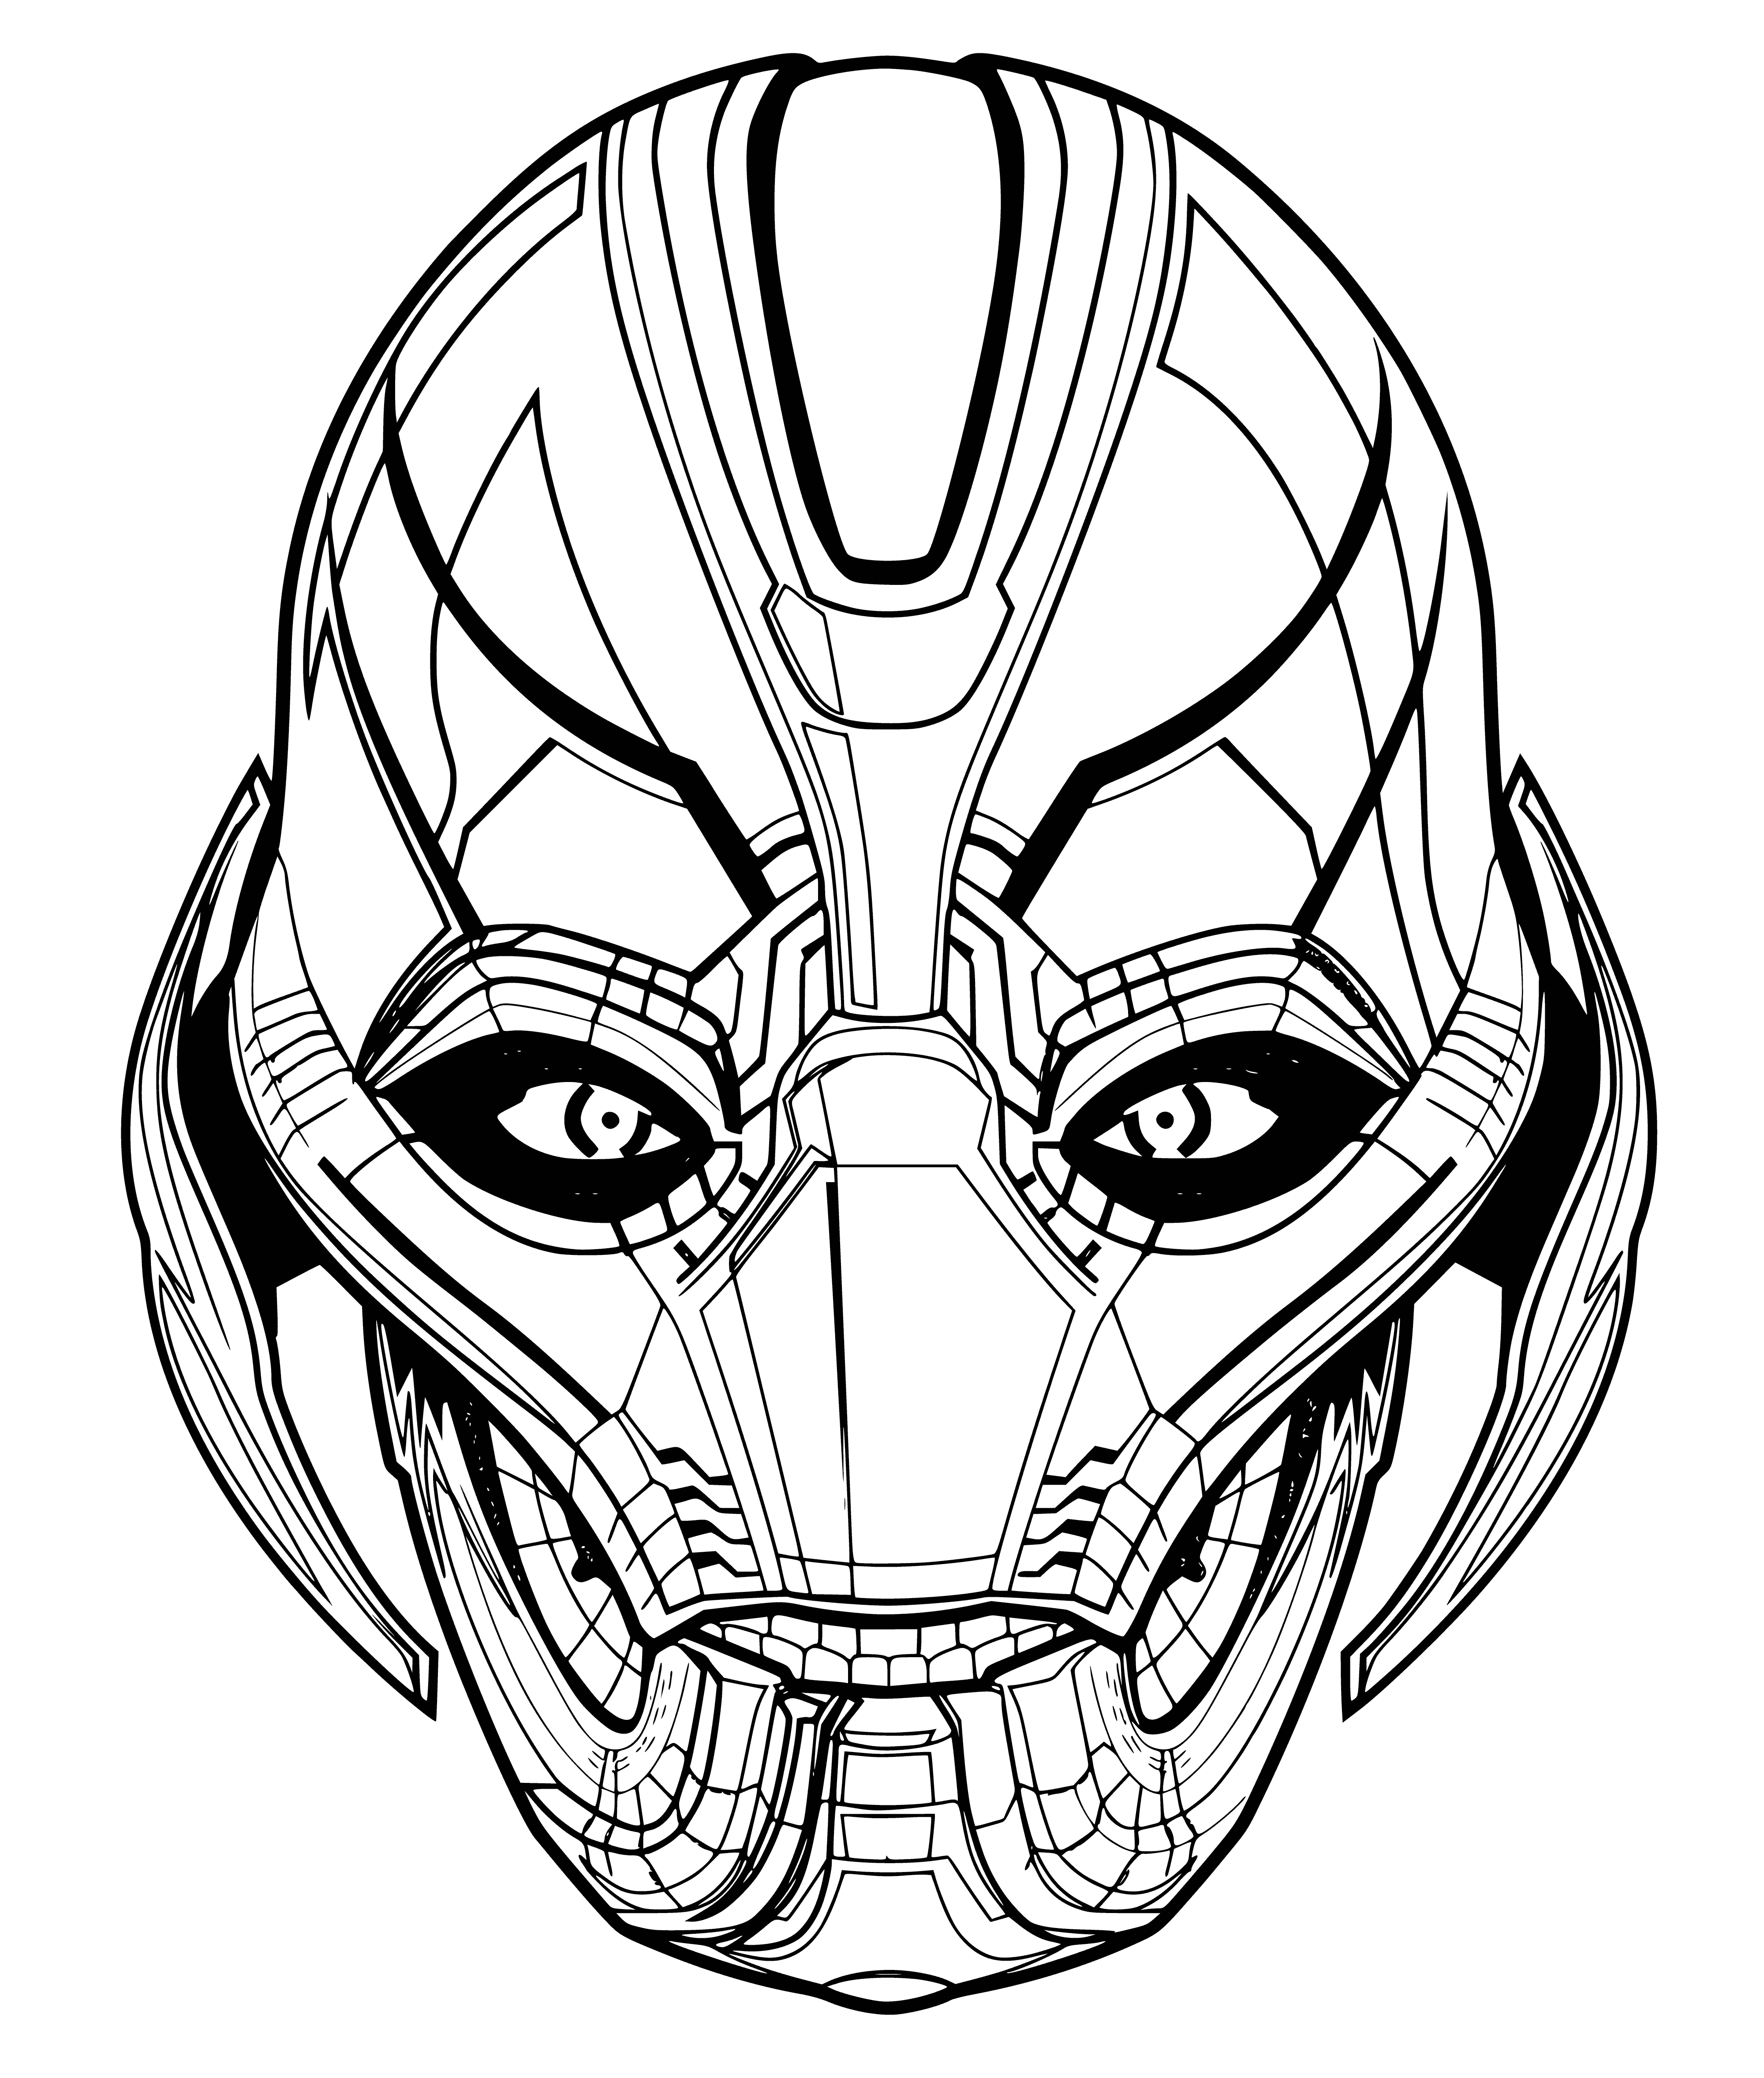 Alttron coloring page